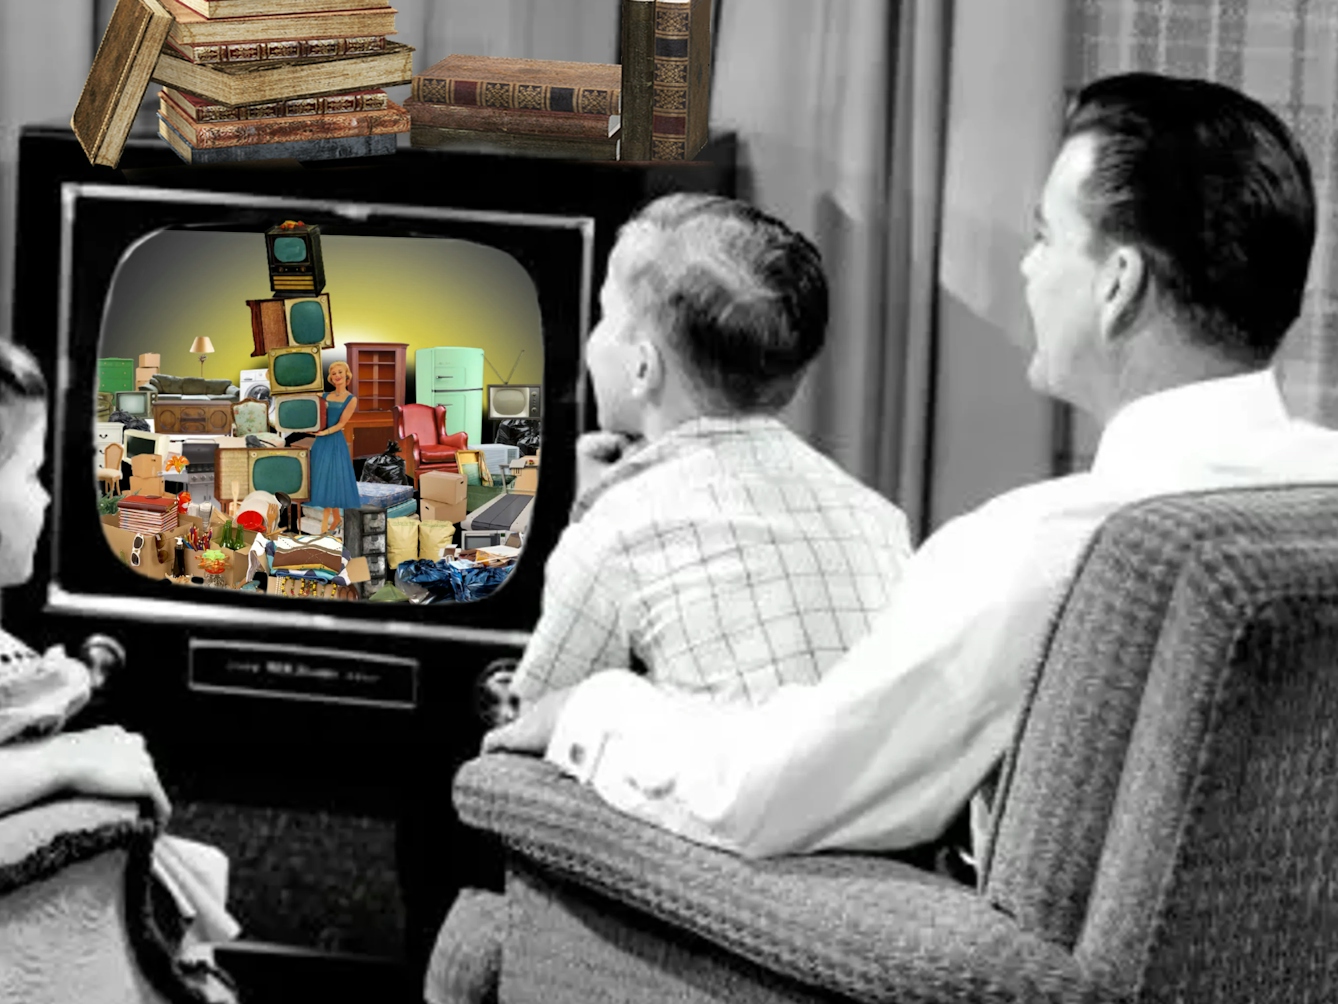 Crop of a larger digital collage showing a family of four (a mother, father and a young boy and girl) sat on two armchairs watching an old fashioned television in black and white. On the television screen there are lots of household objects crowded together and stack on top of one another haphazardly. There are some ornate hardback books piled up on top of the television set. 